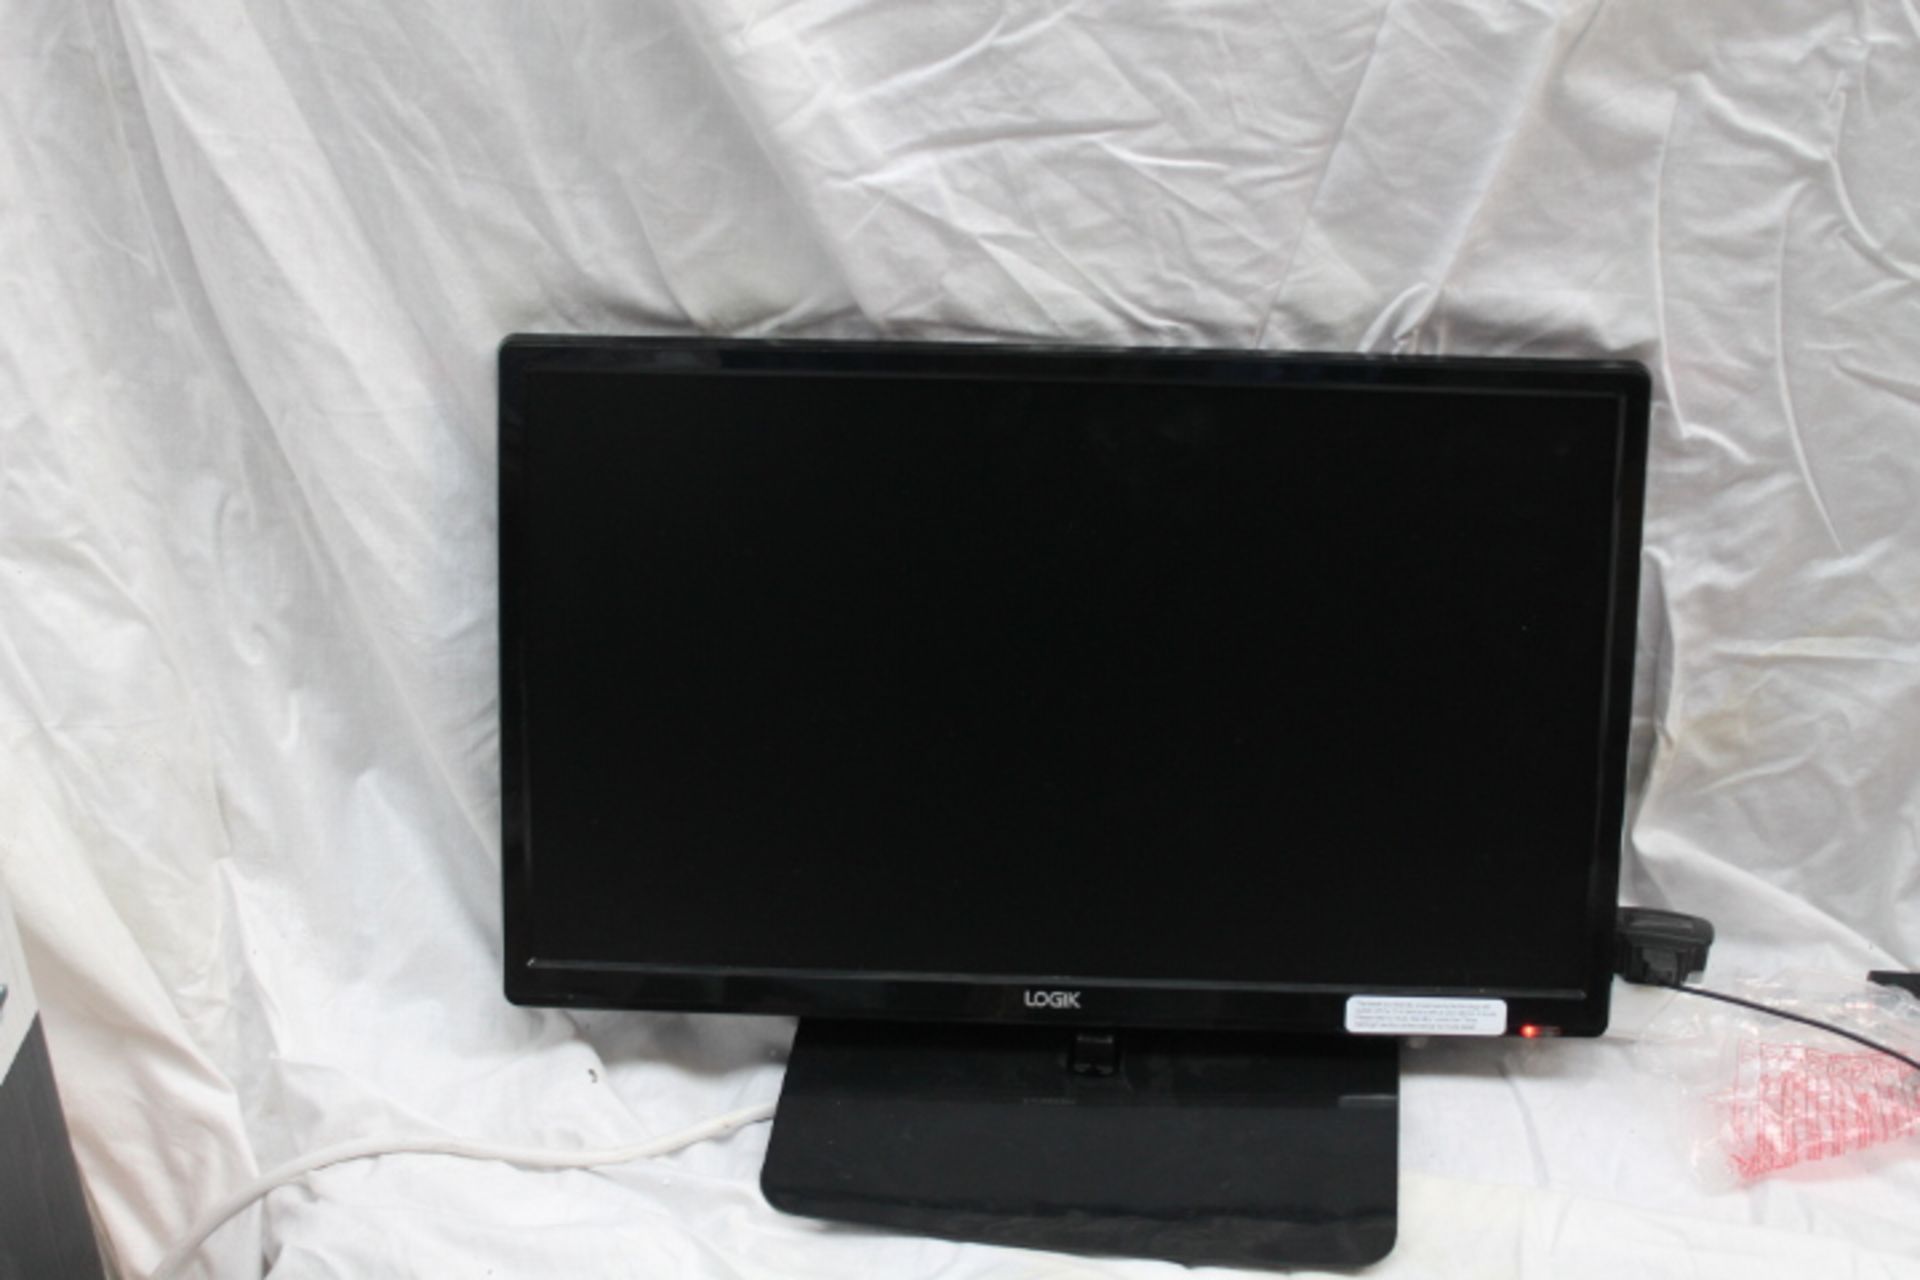 V Grade U Logik 22 Inch Led TV With Built-In DVD Player Stand Plus Remote - Powers Up But No Display